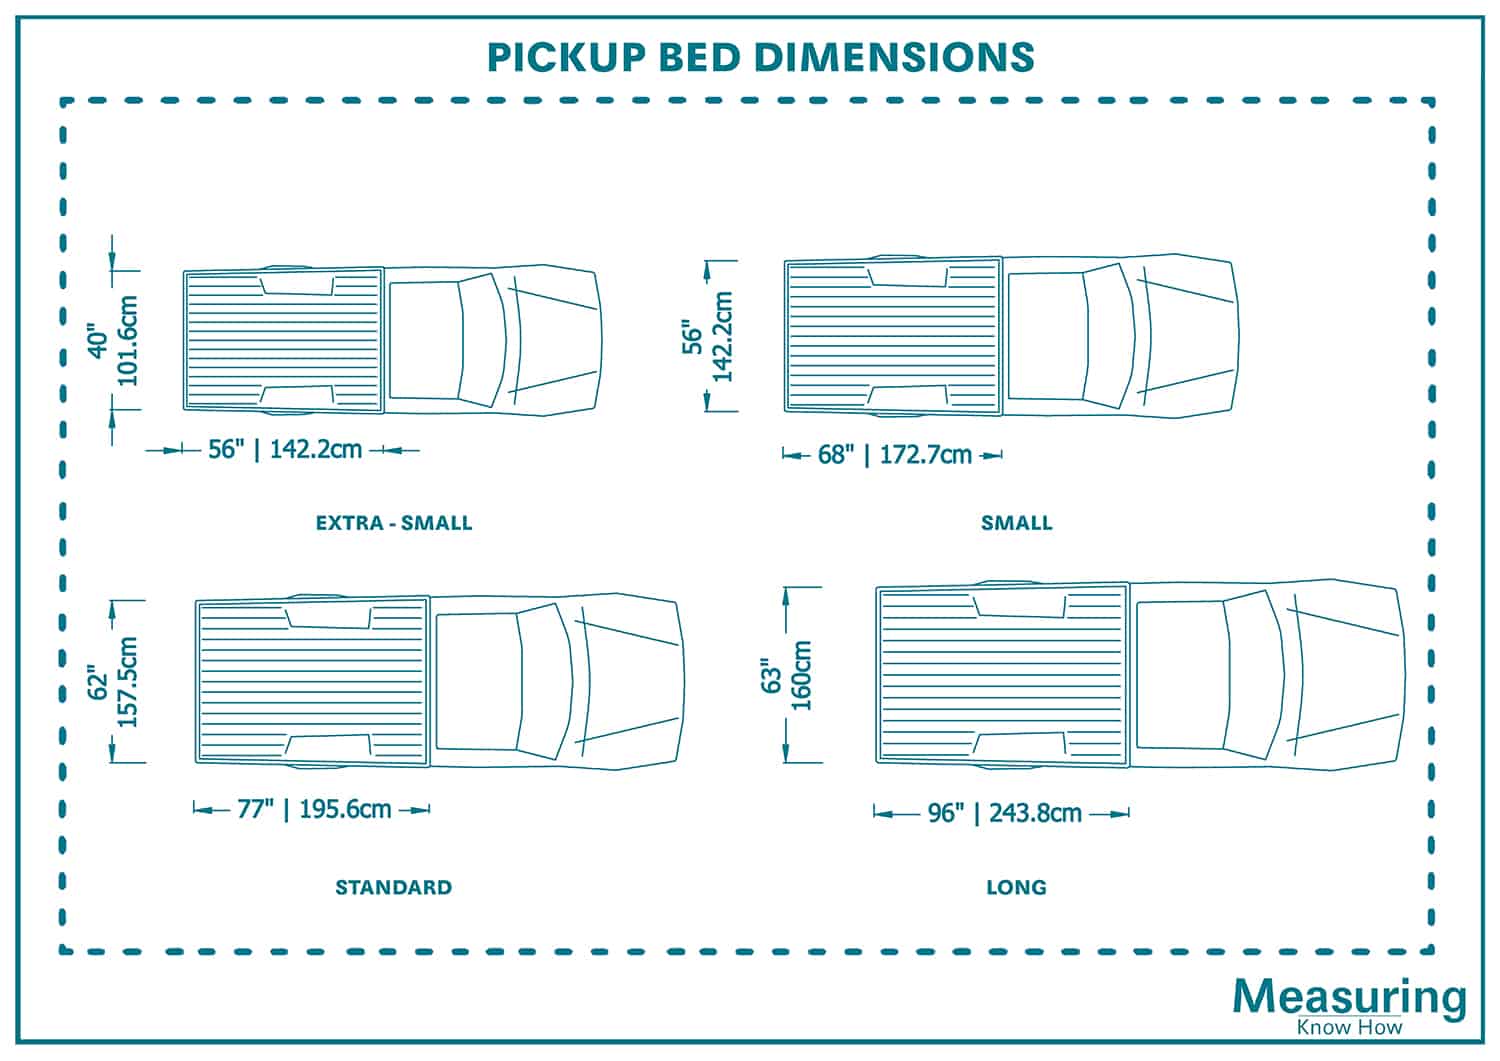 Ford Truck Bed Dimensions Chart A Comprehensive Guide to Choosing the